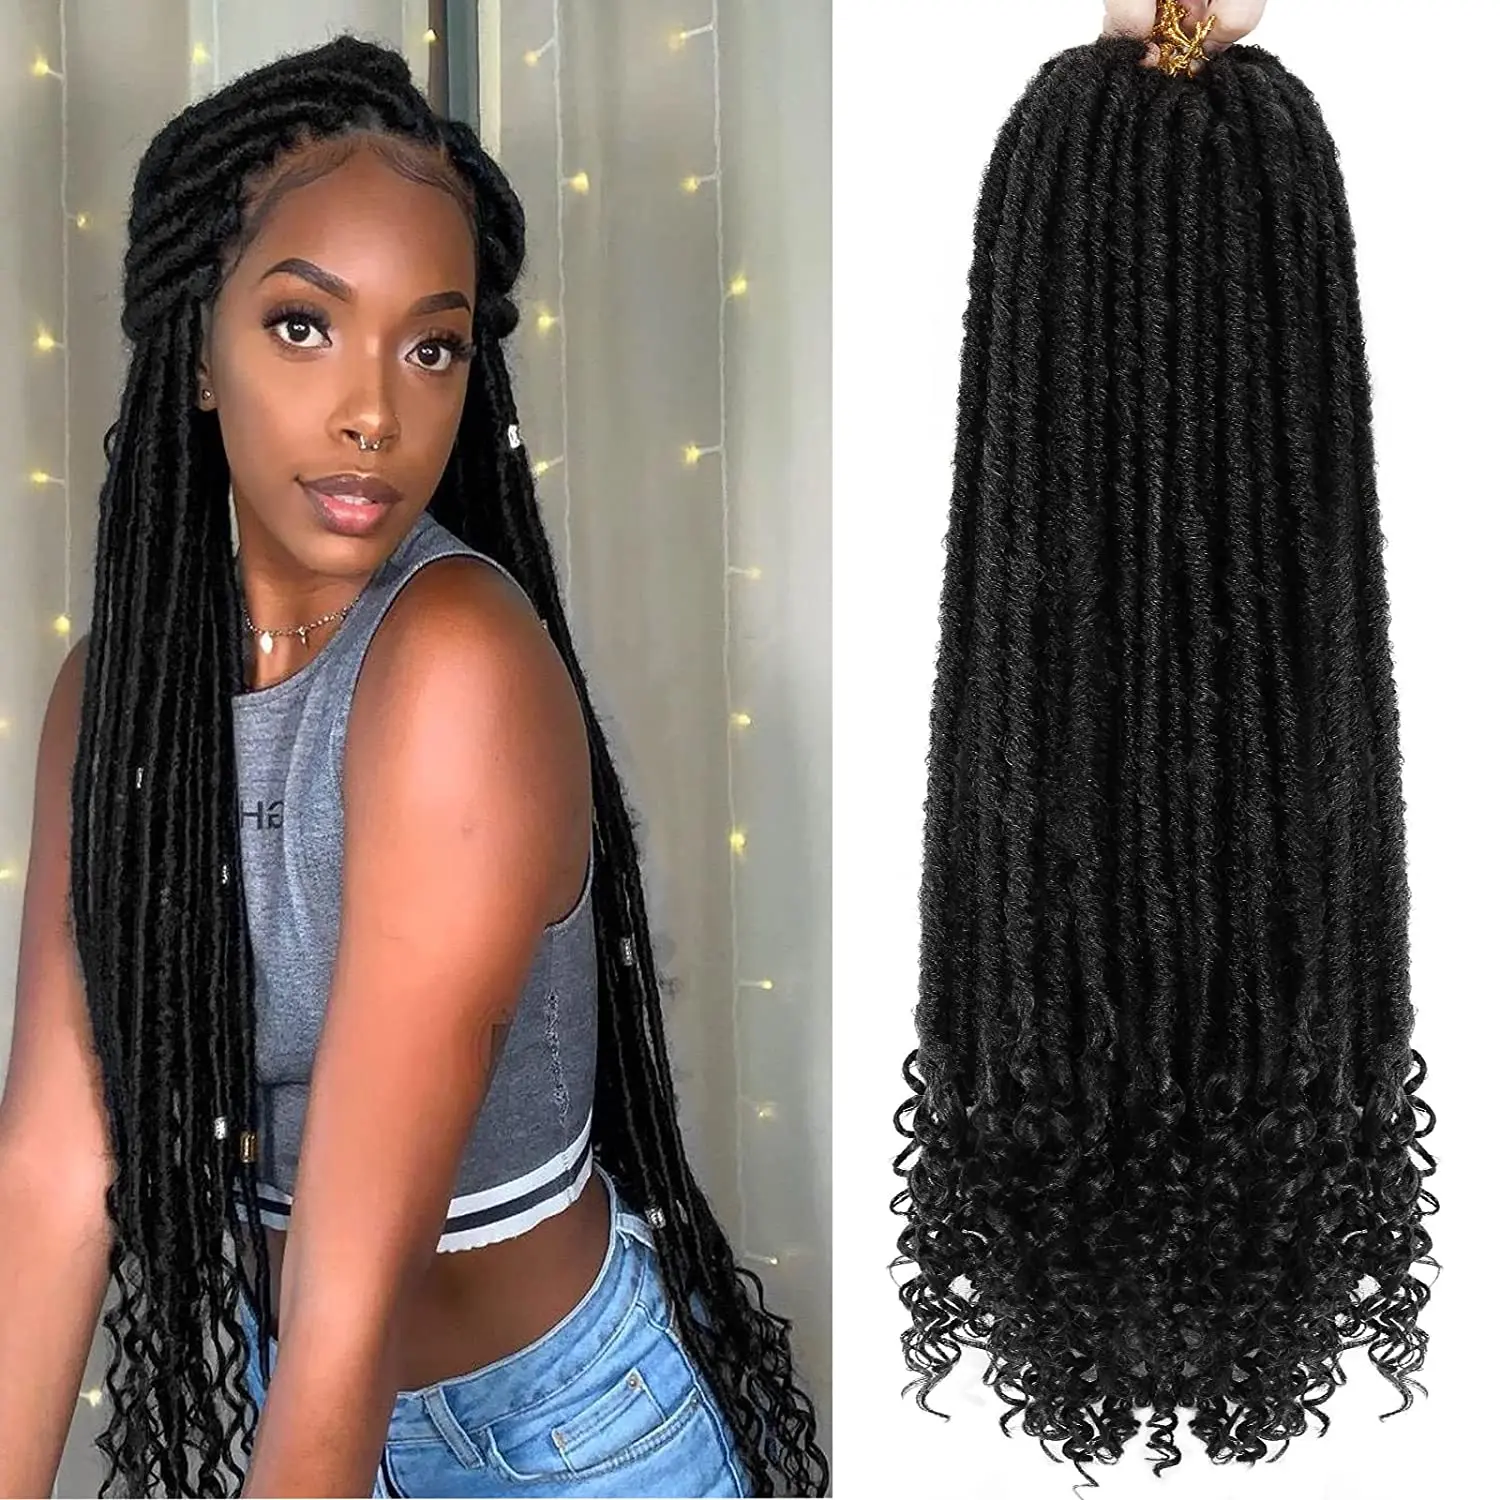 

Synthetic Goddess Faux Locs Curly Crochet Braids Hair Ombre River Locs Braiding Hair Extension 16 20inch Soft Natural Braid